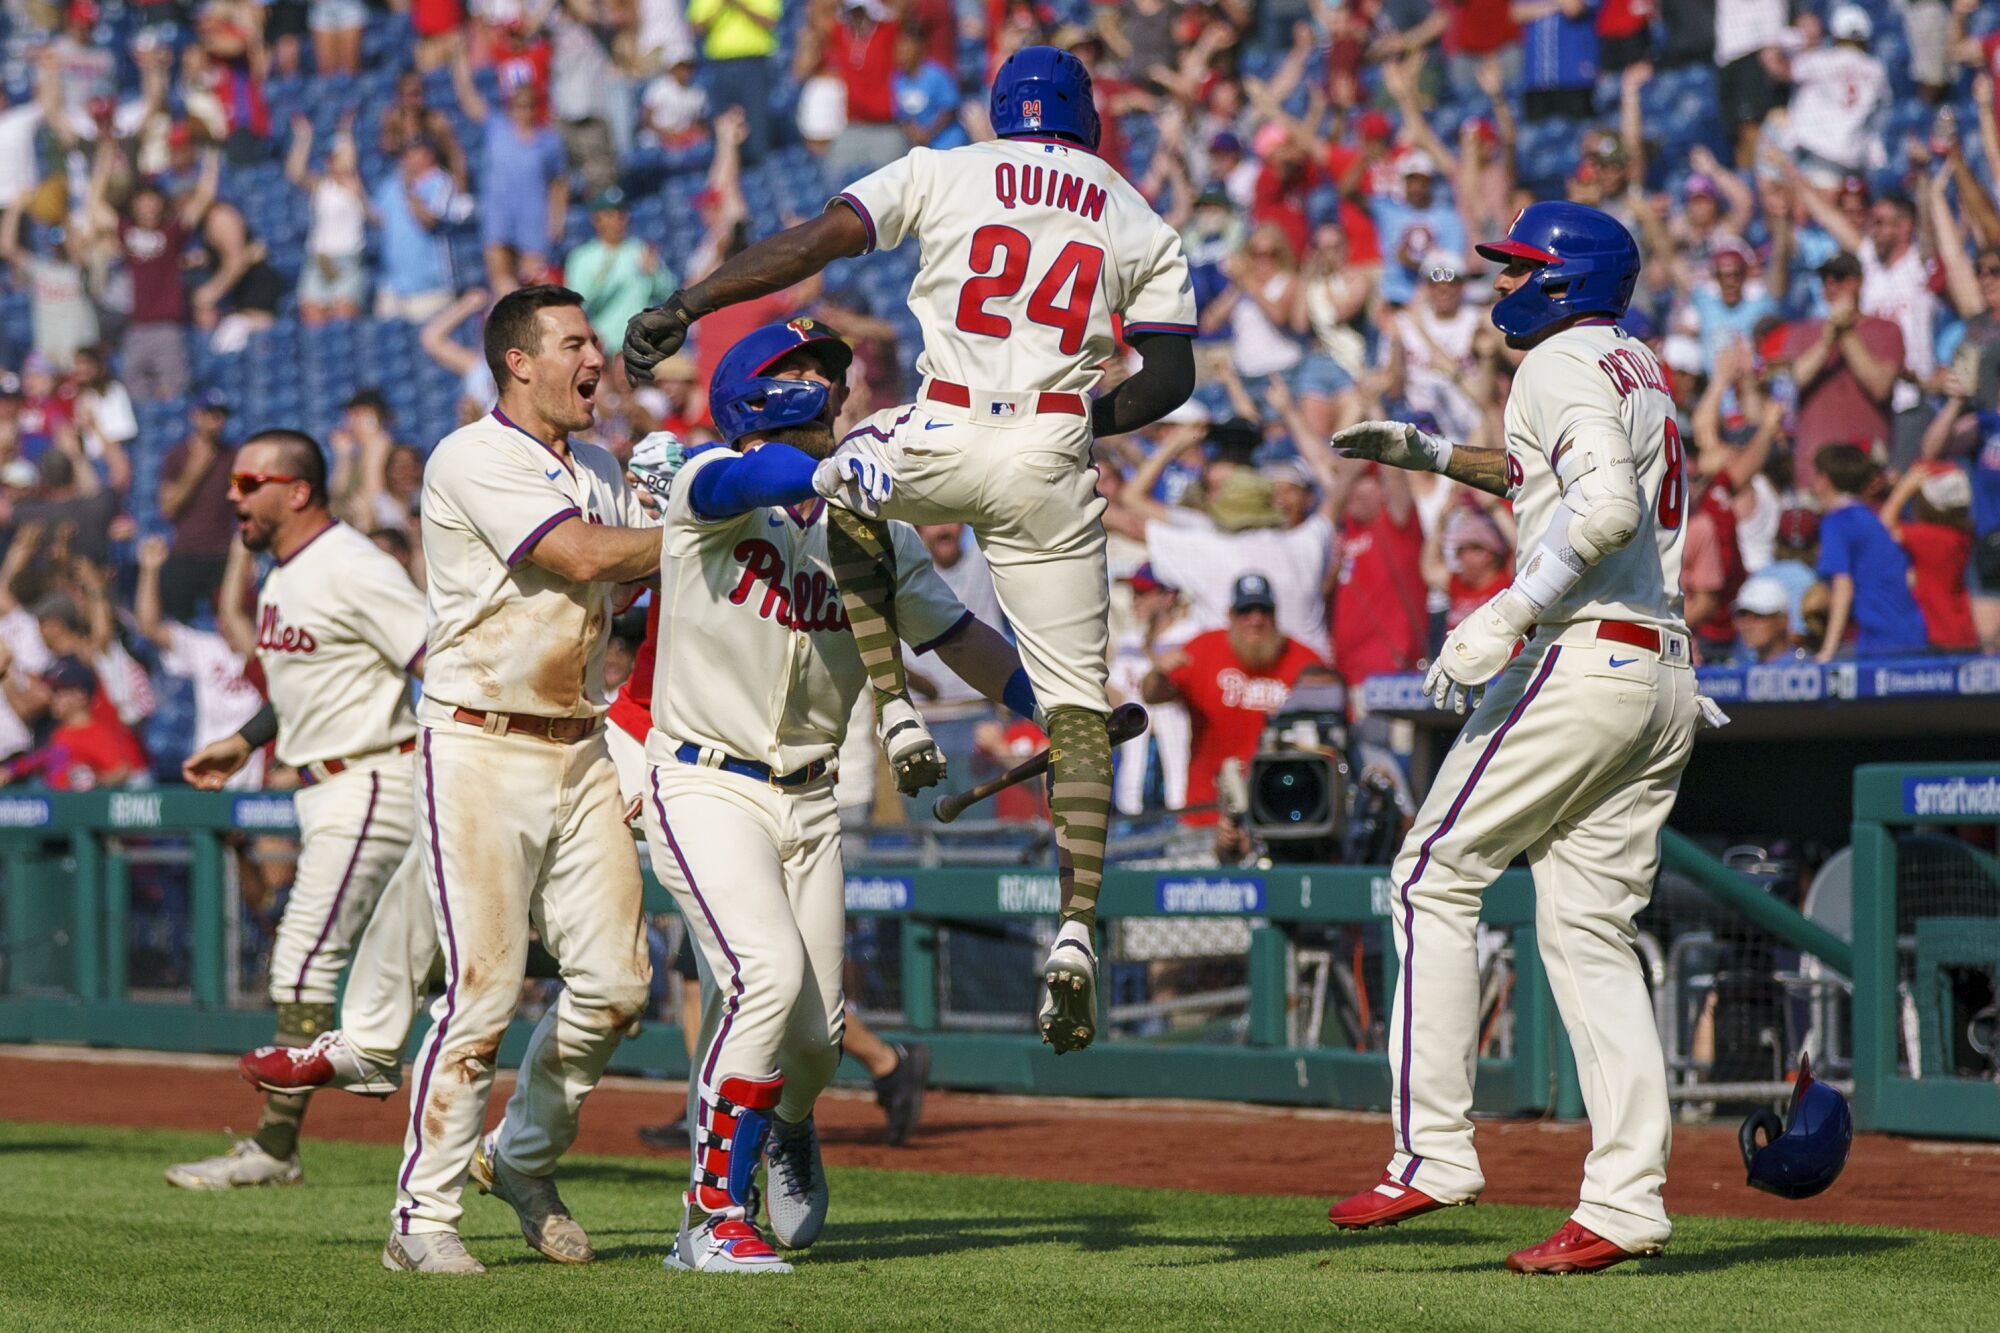 Philadelphia's Roman Quinn, center, celebrates with teammates after scoring the winning run against the Dodgers.